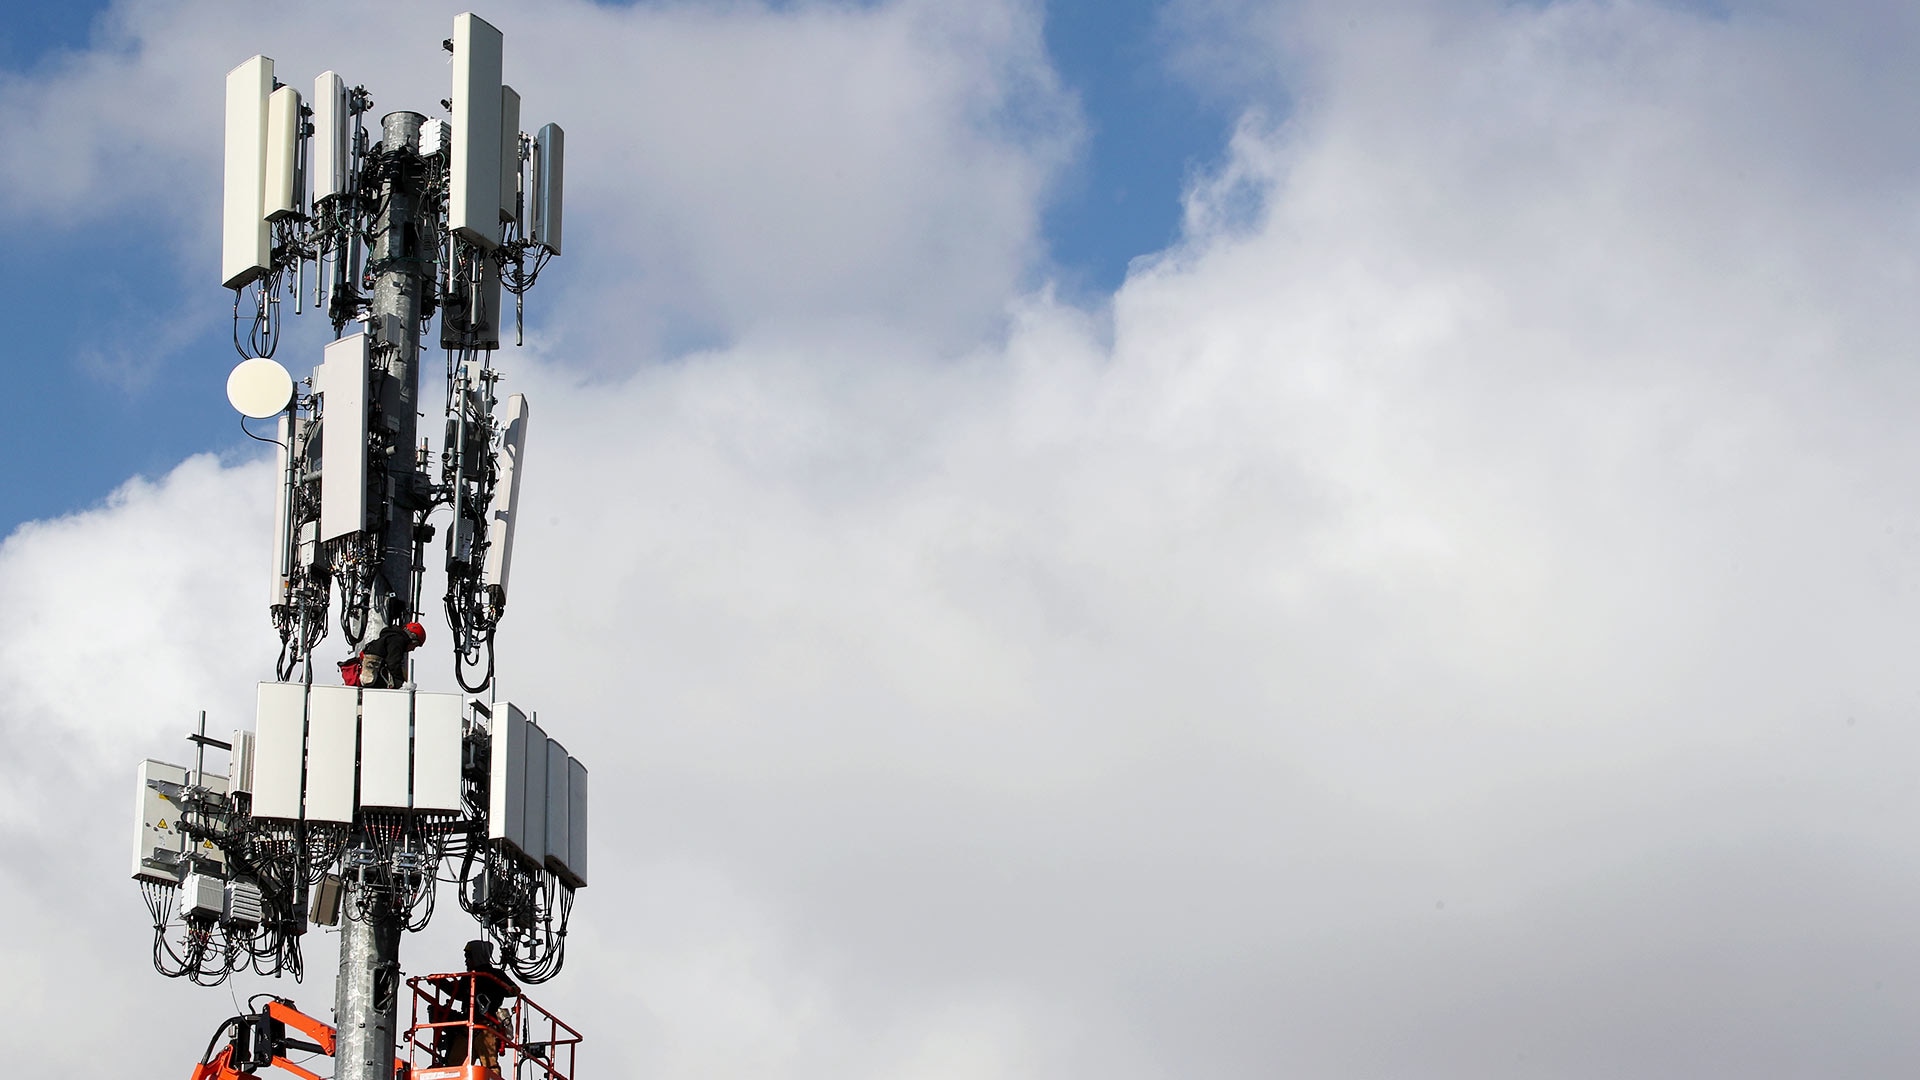 5G coverage solutions